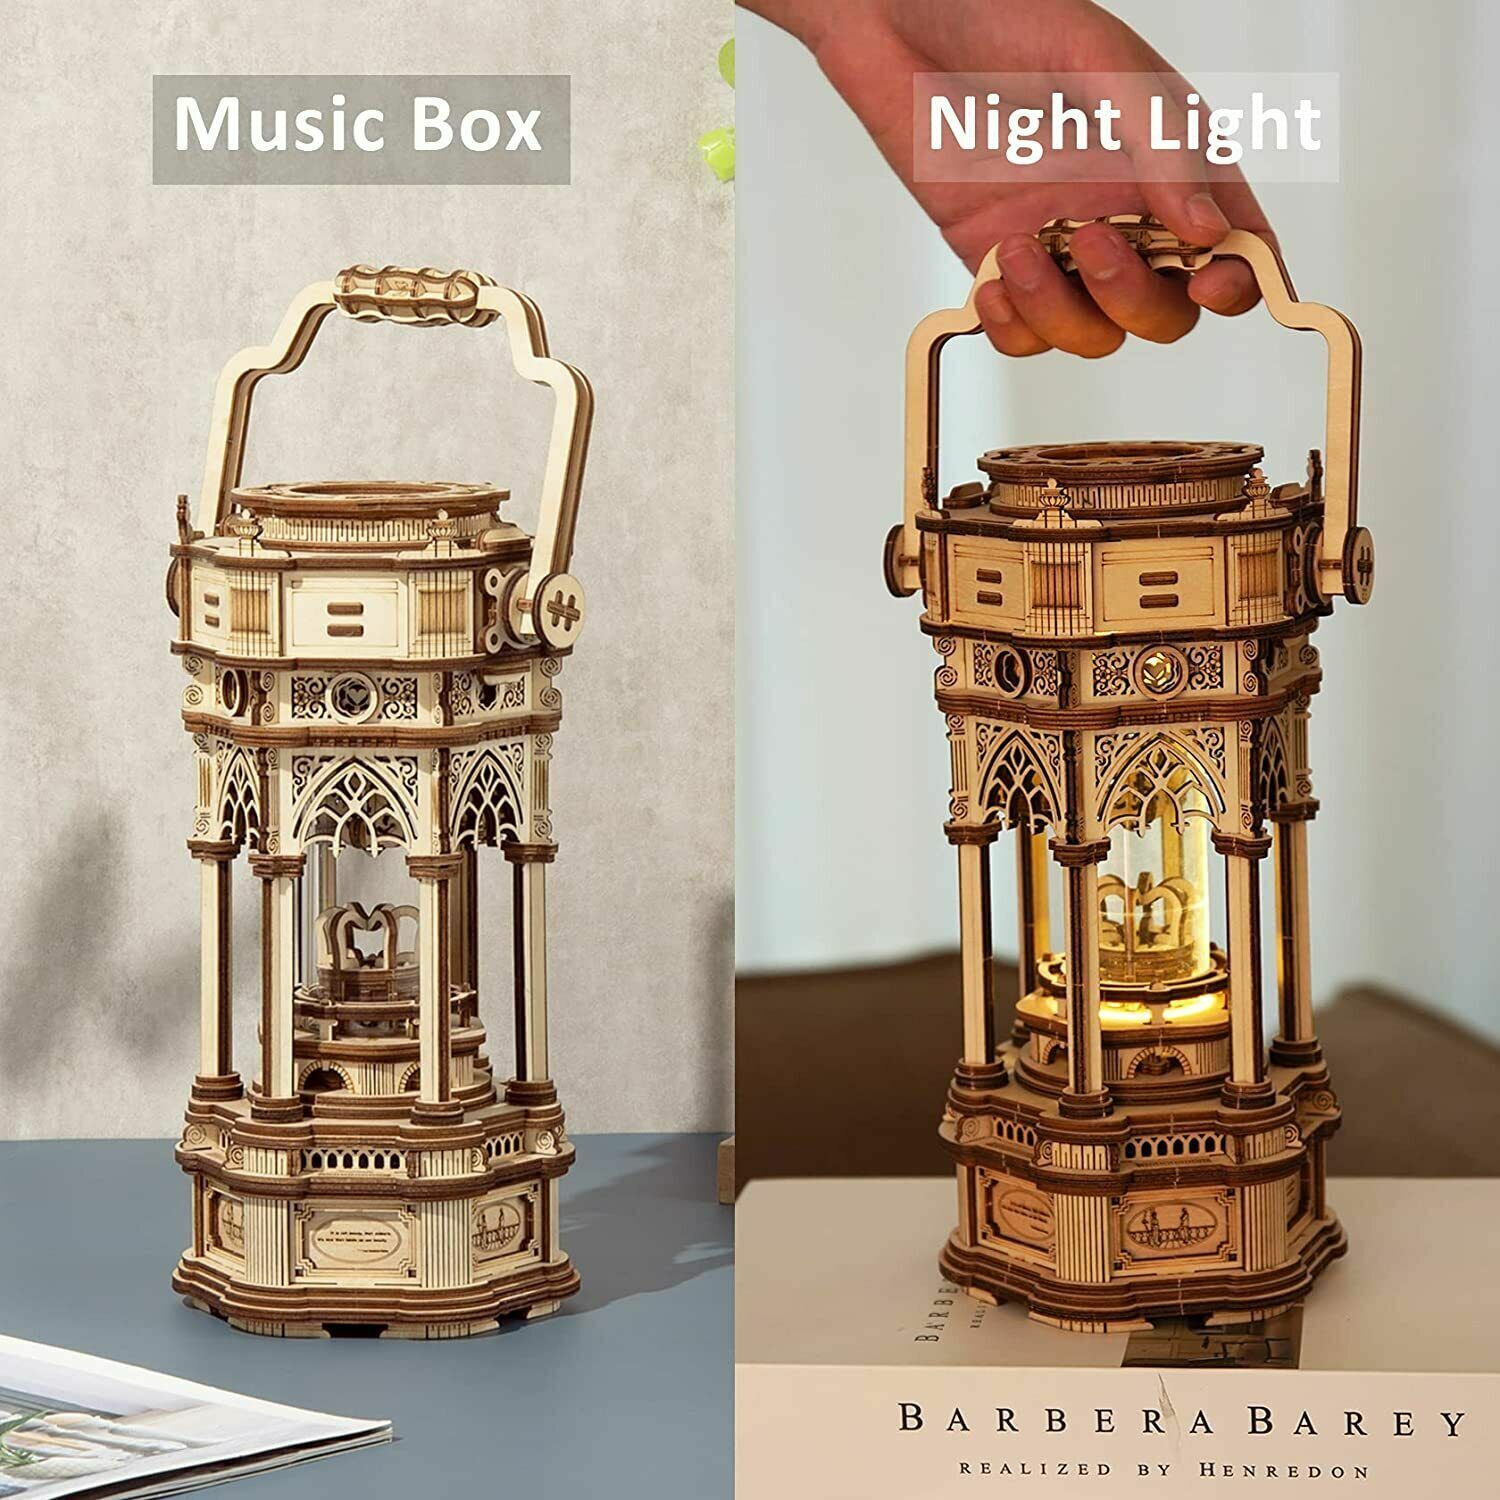 ROKR LED Victorian Lantern Music Box DIY 3D Wooden Puzzles Crafts Kits for Gifts